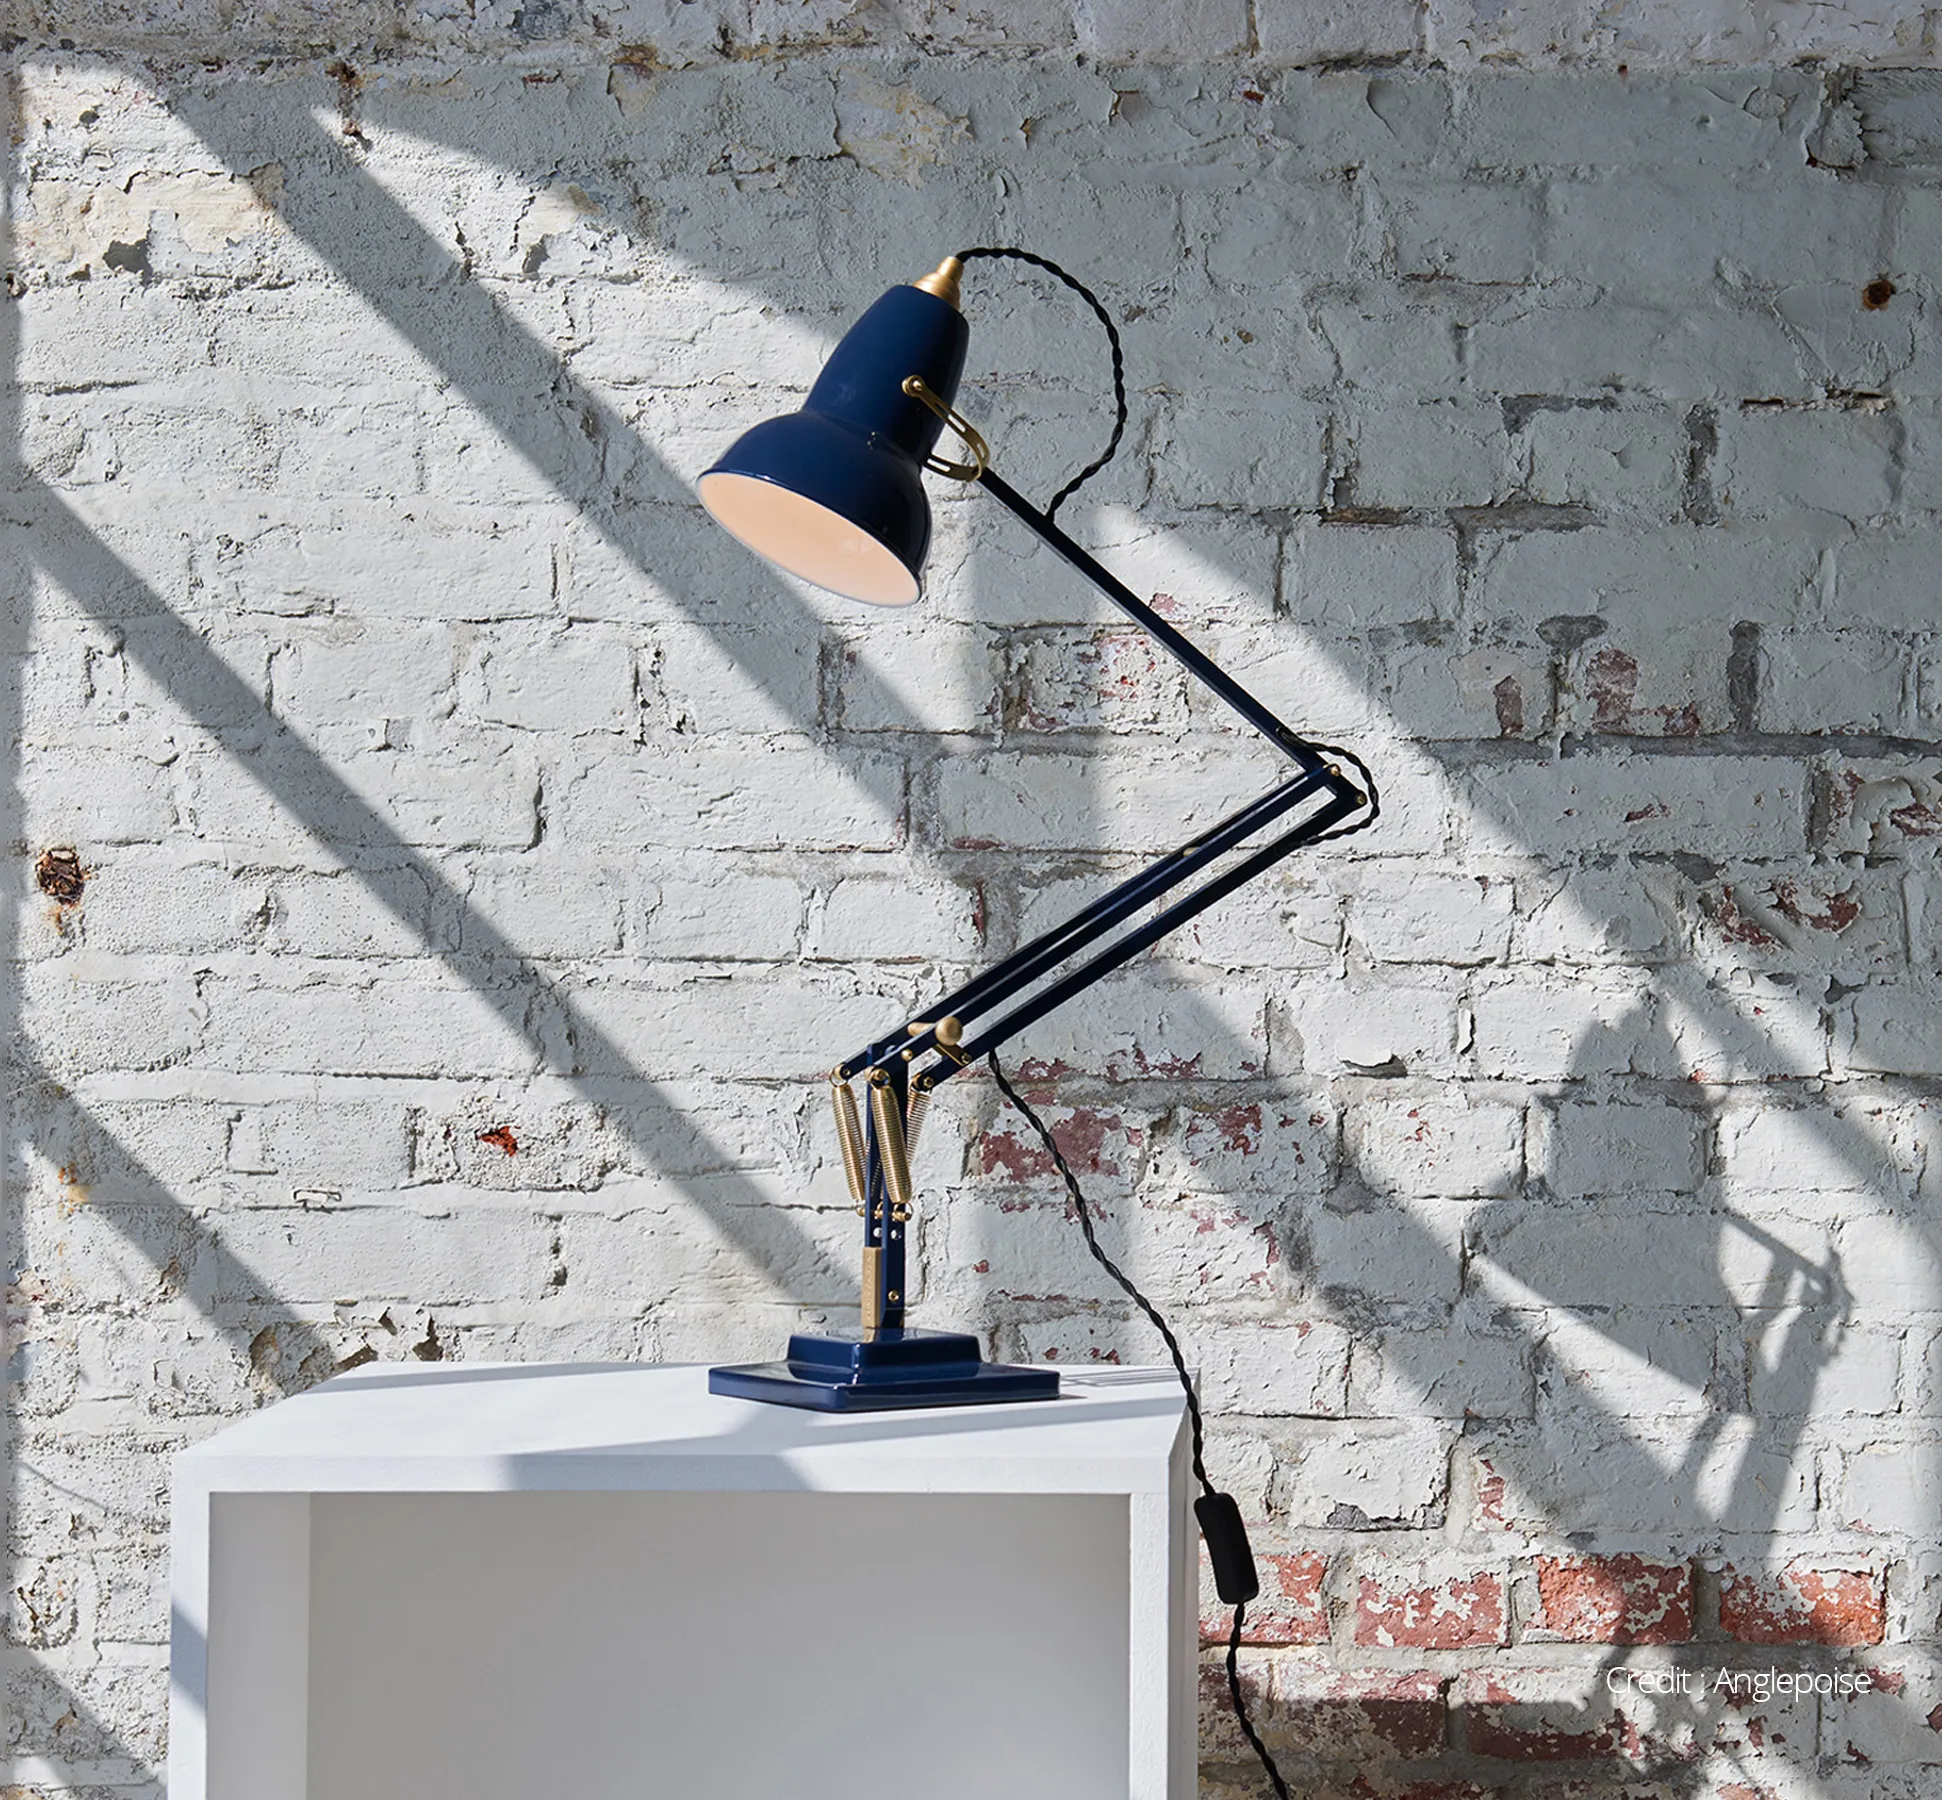 Anglepoise lamp on a white plinth with peeling painted brick background